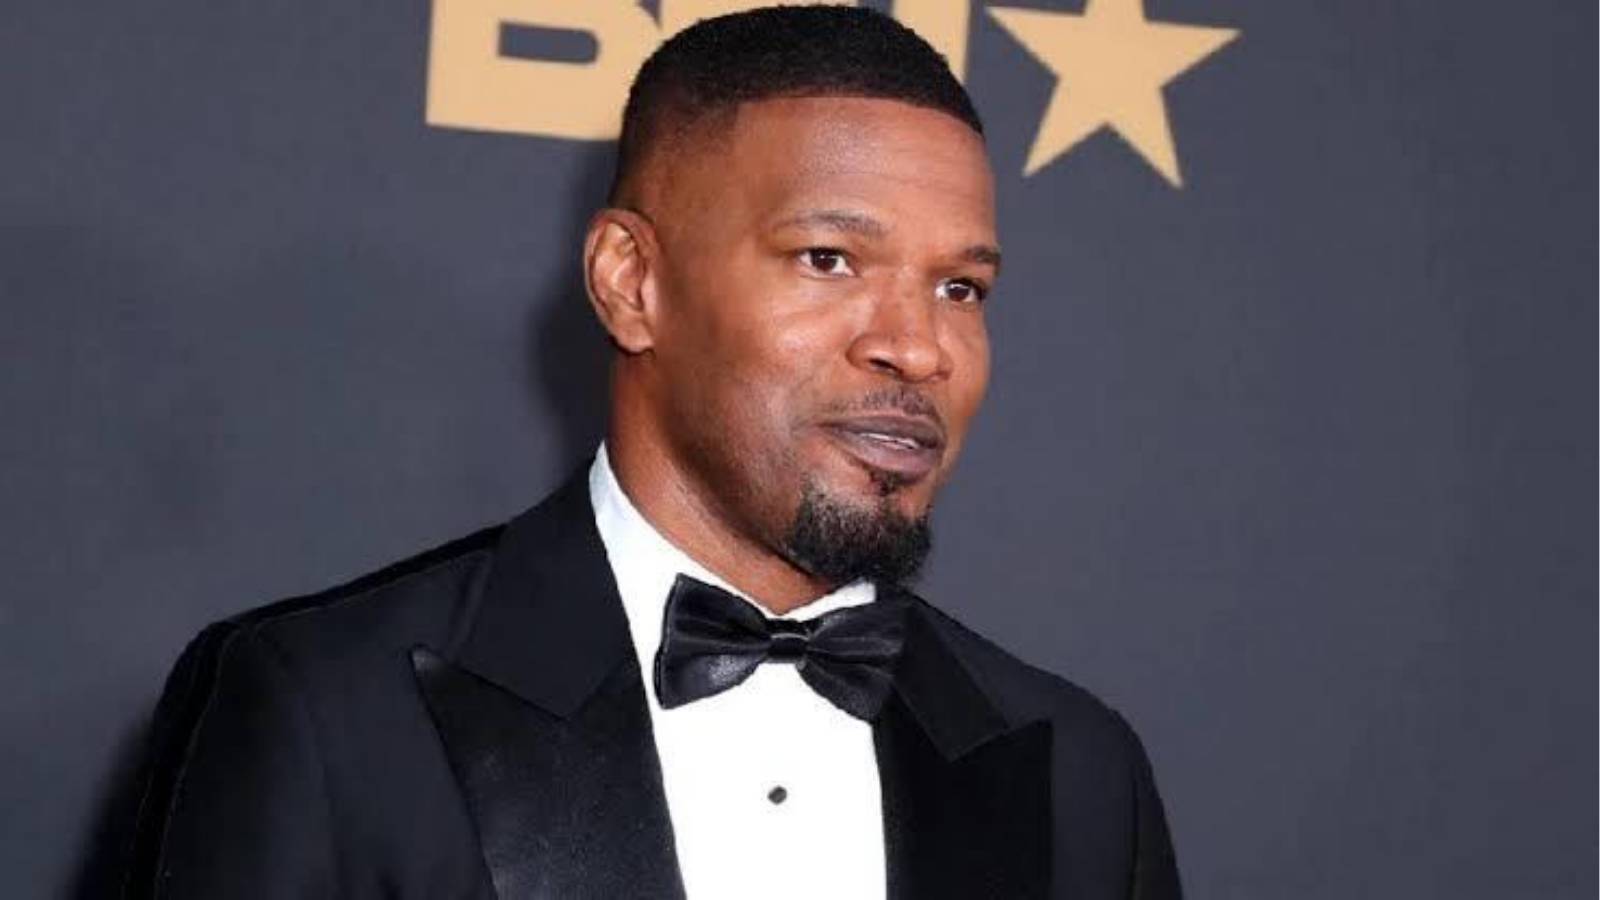 Jamie Foxx begged Cameron Diaz for starring in the Netflix movie, Back in Action